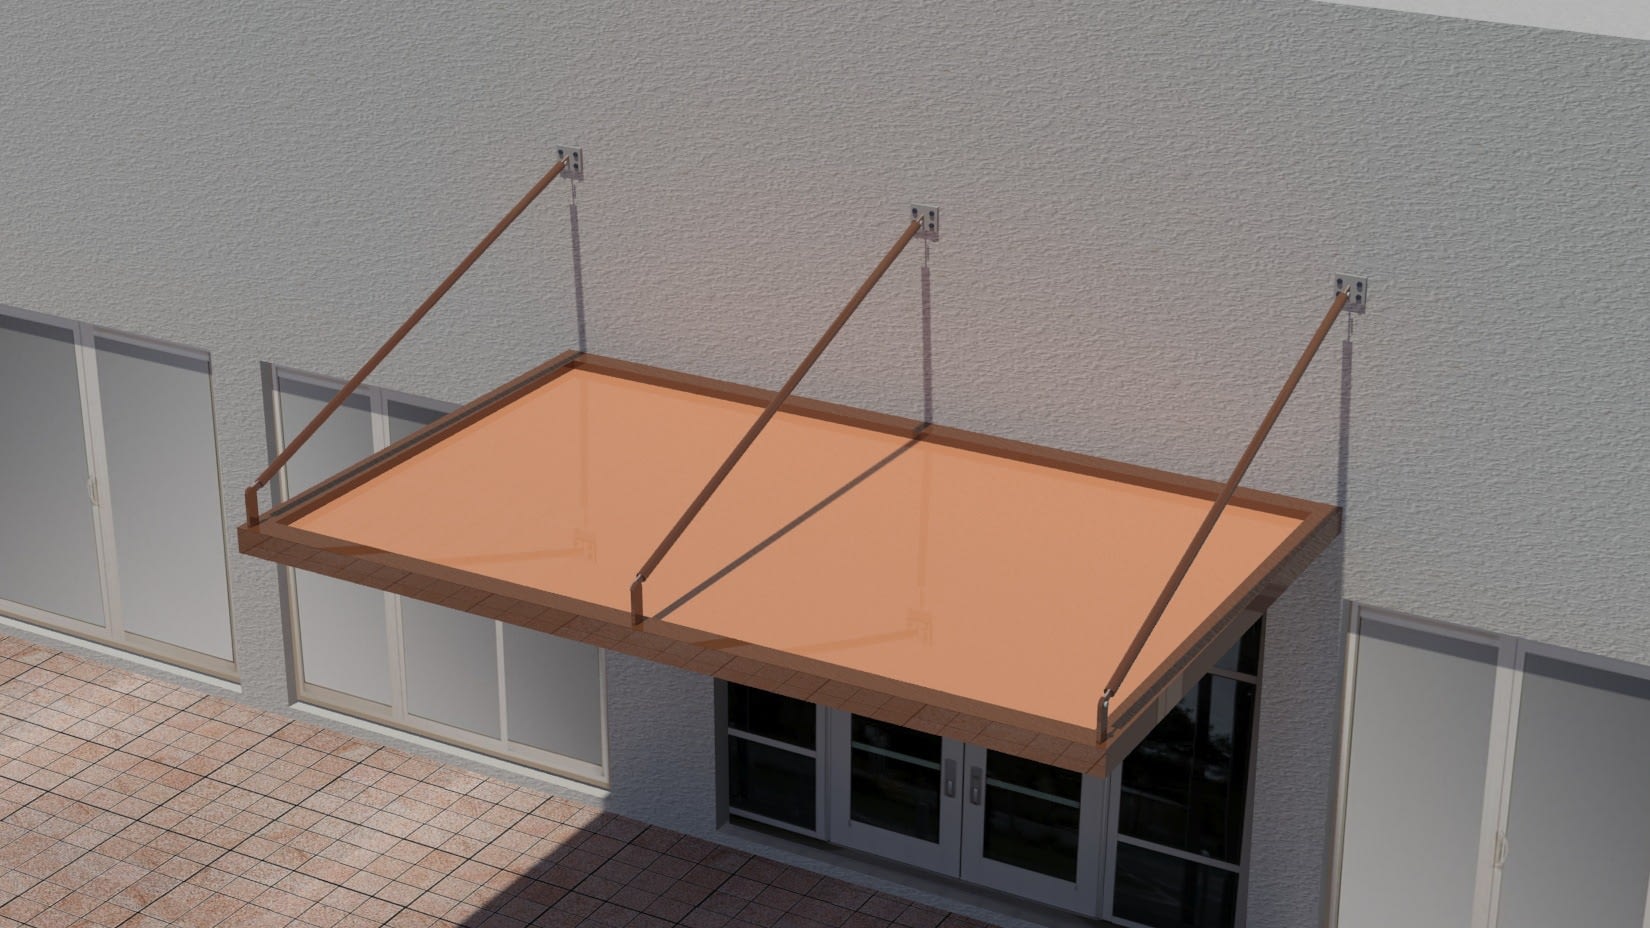 Canopy & Arm Awning